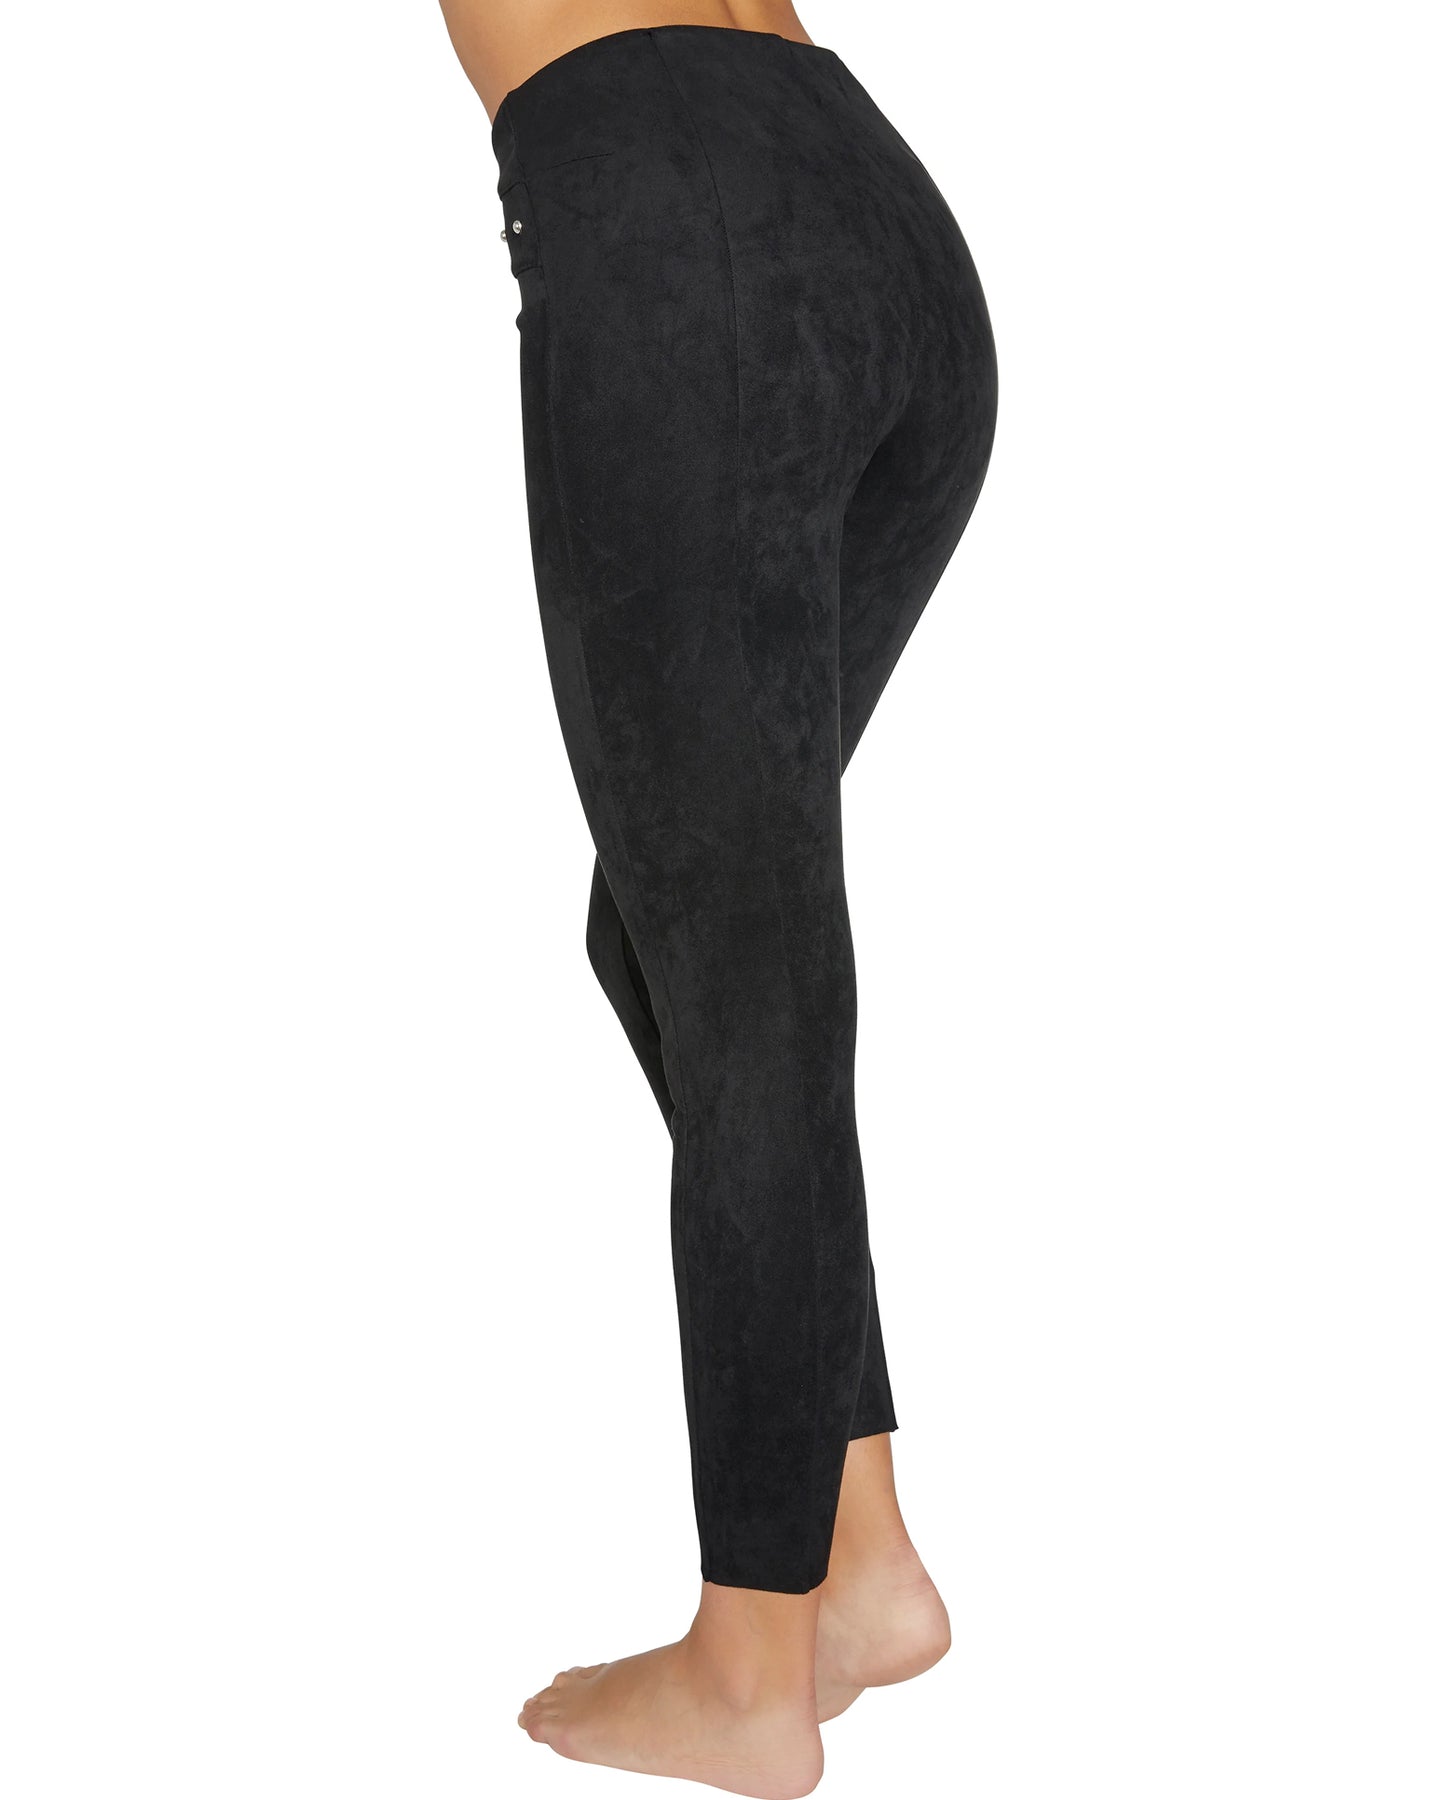 Ysabel Mora 70258 Suede Effect Treggings - black high waist trouser leggings in faux suede with silver studs, back view.